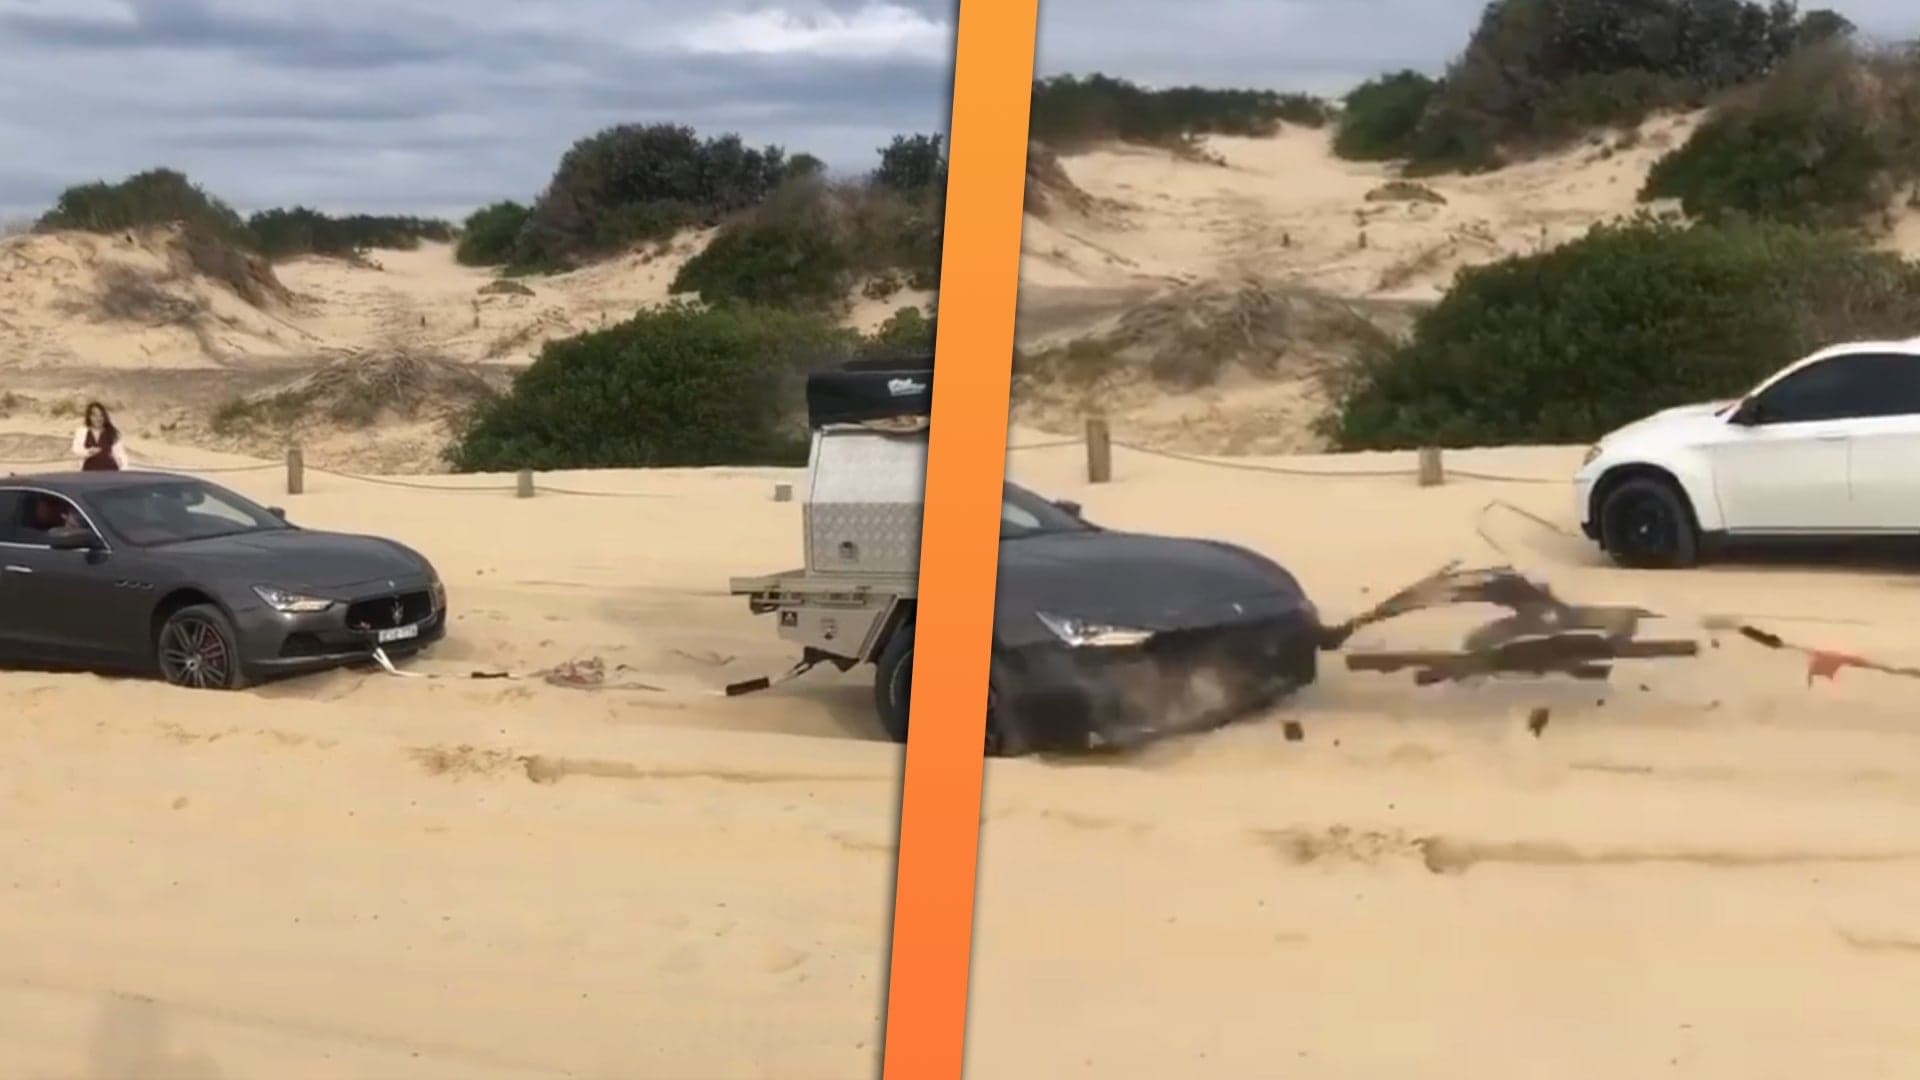 Watch Everything You’re Not Supposed to Do When Pulling a Stuck Car Backfire Spectacularly